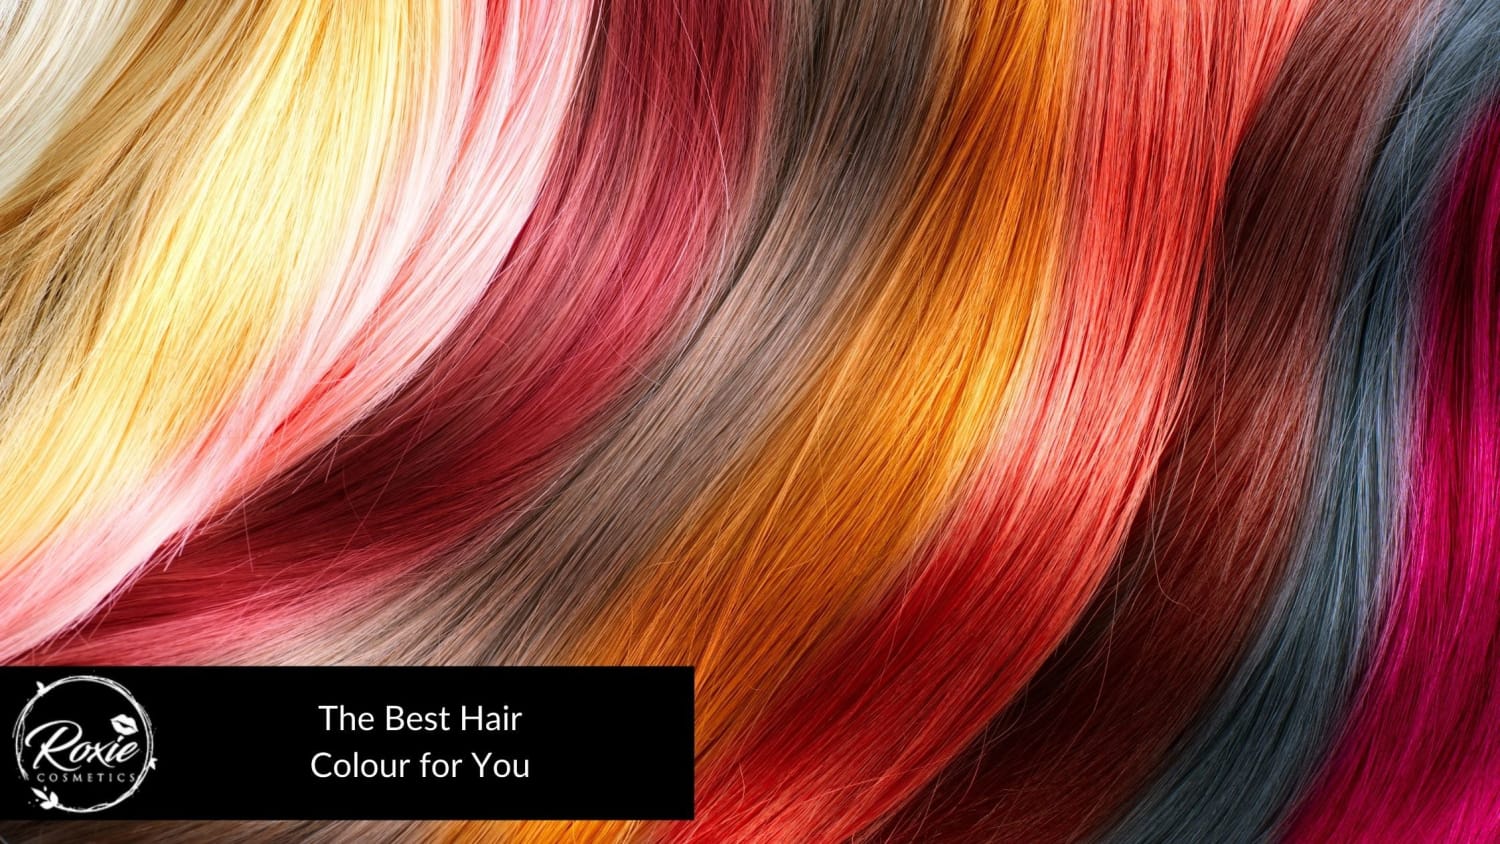 The Best Hair Colour for You